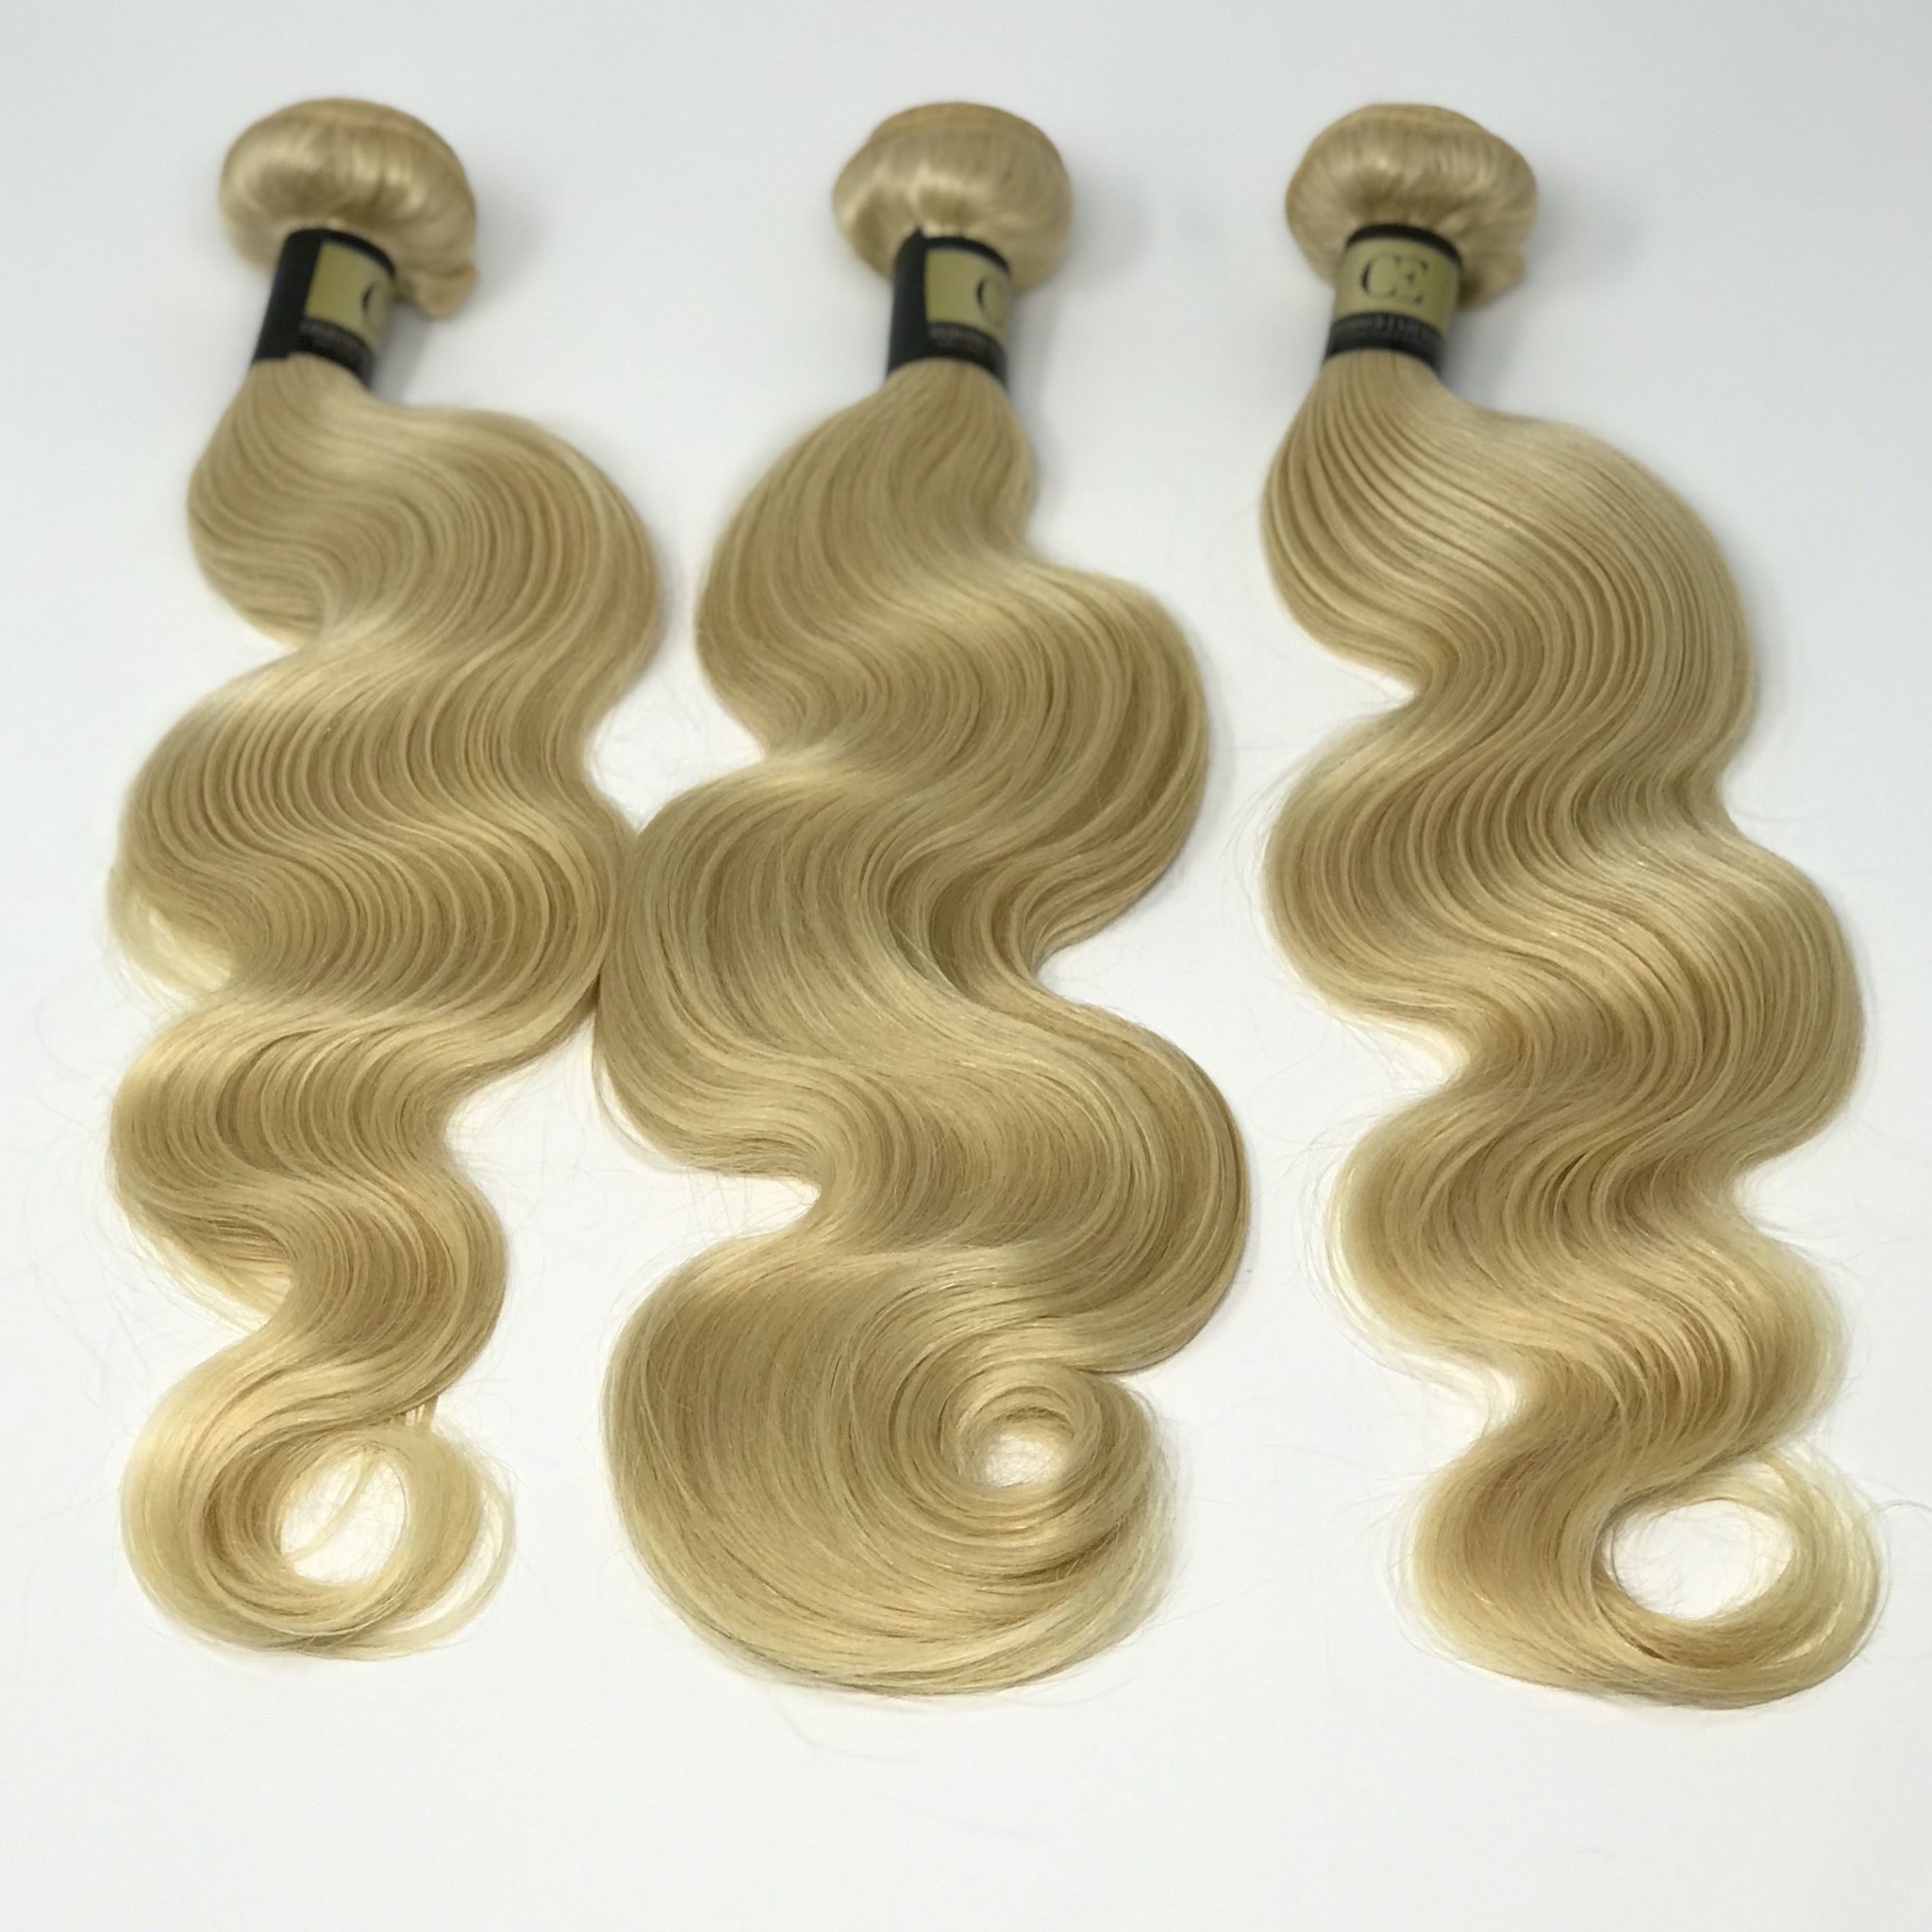 https://conditionedextensions.com/products/brazilian-blonde-body-wave